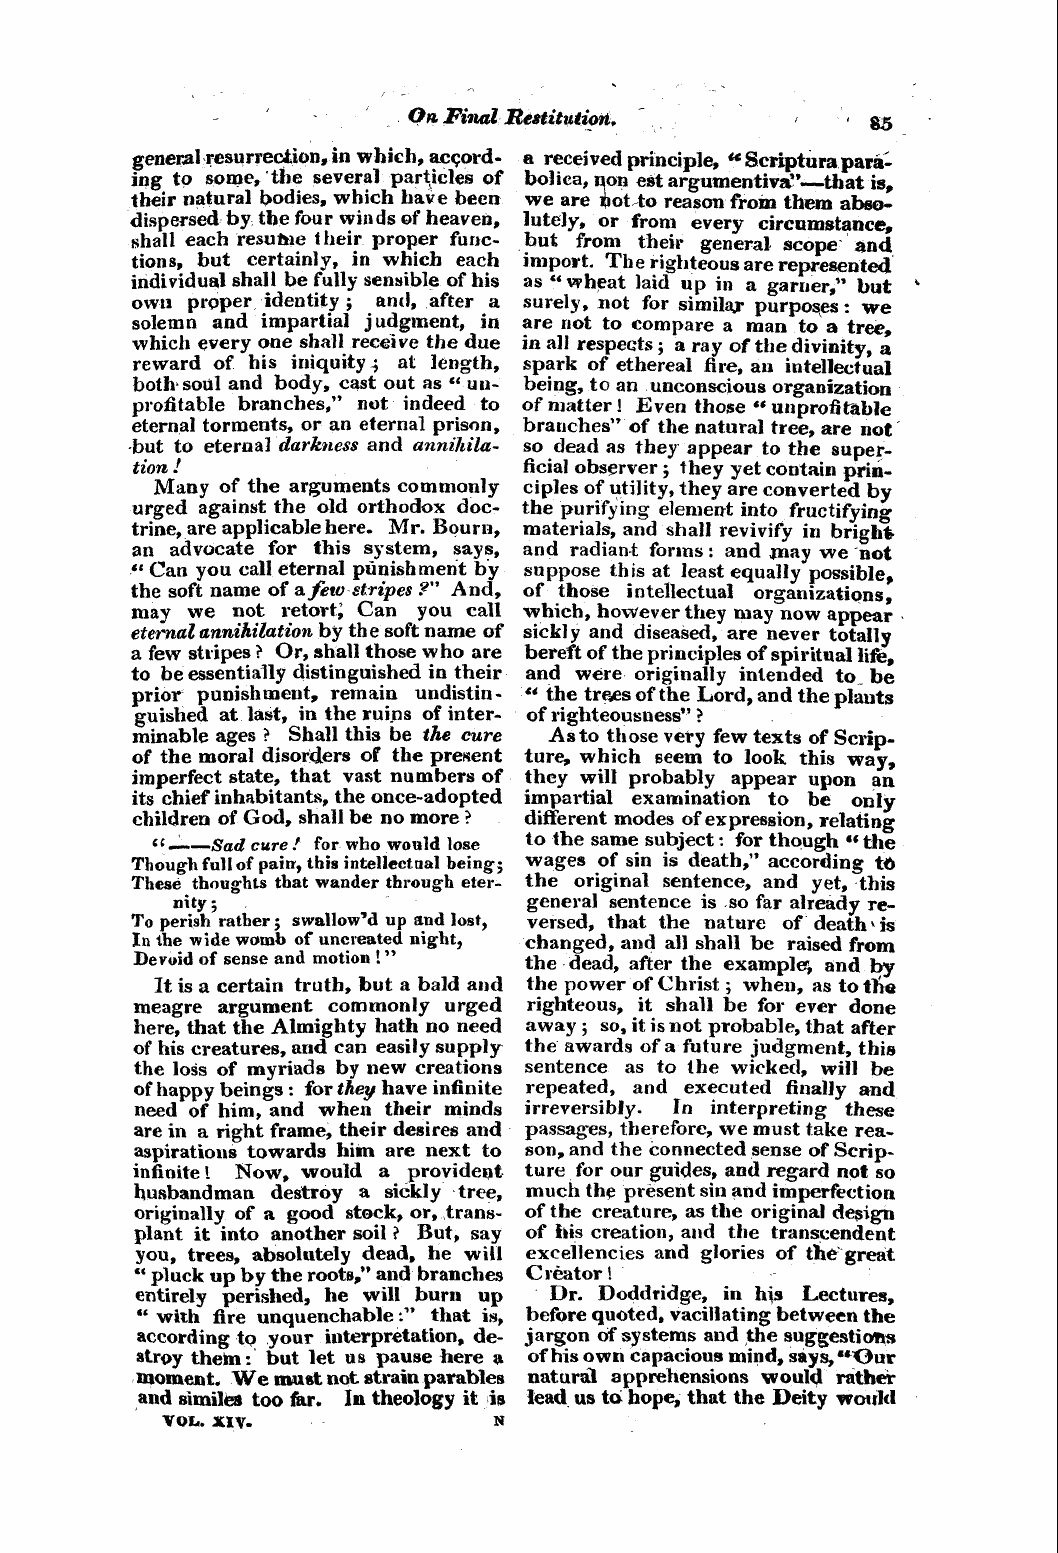 Monthly Repository (1806-1838) and Unitarian Chronicle (1832-1833): F Y, 1st edition, Supplement: 17